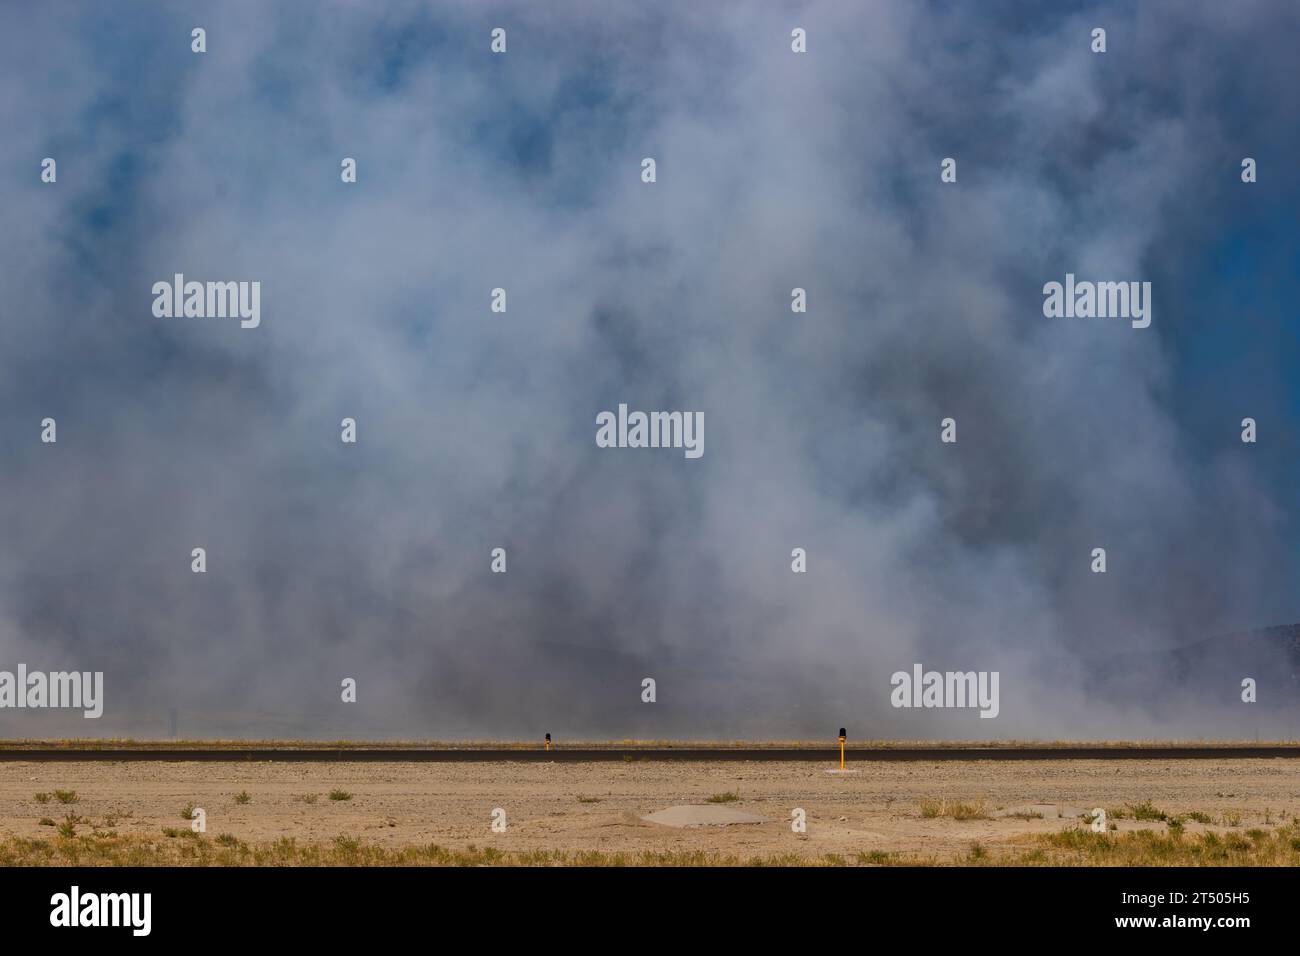 Smoke from a jet afterburner hangs over runway at Stead Airport in Neveda. Stock Photo